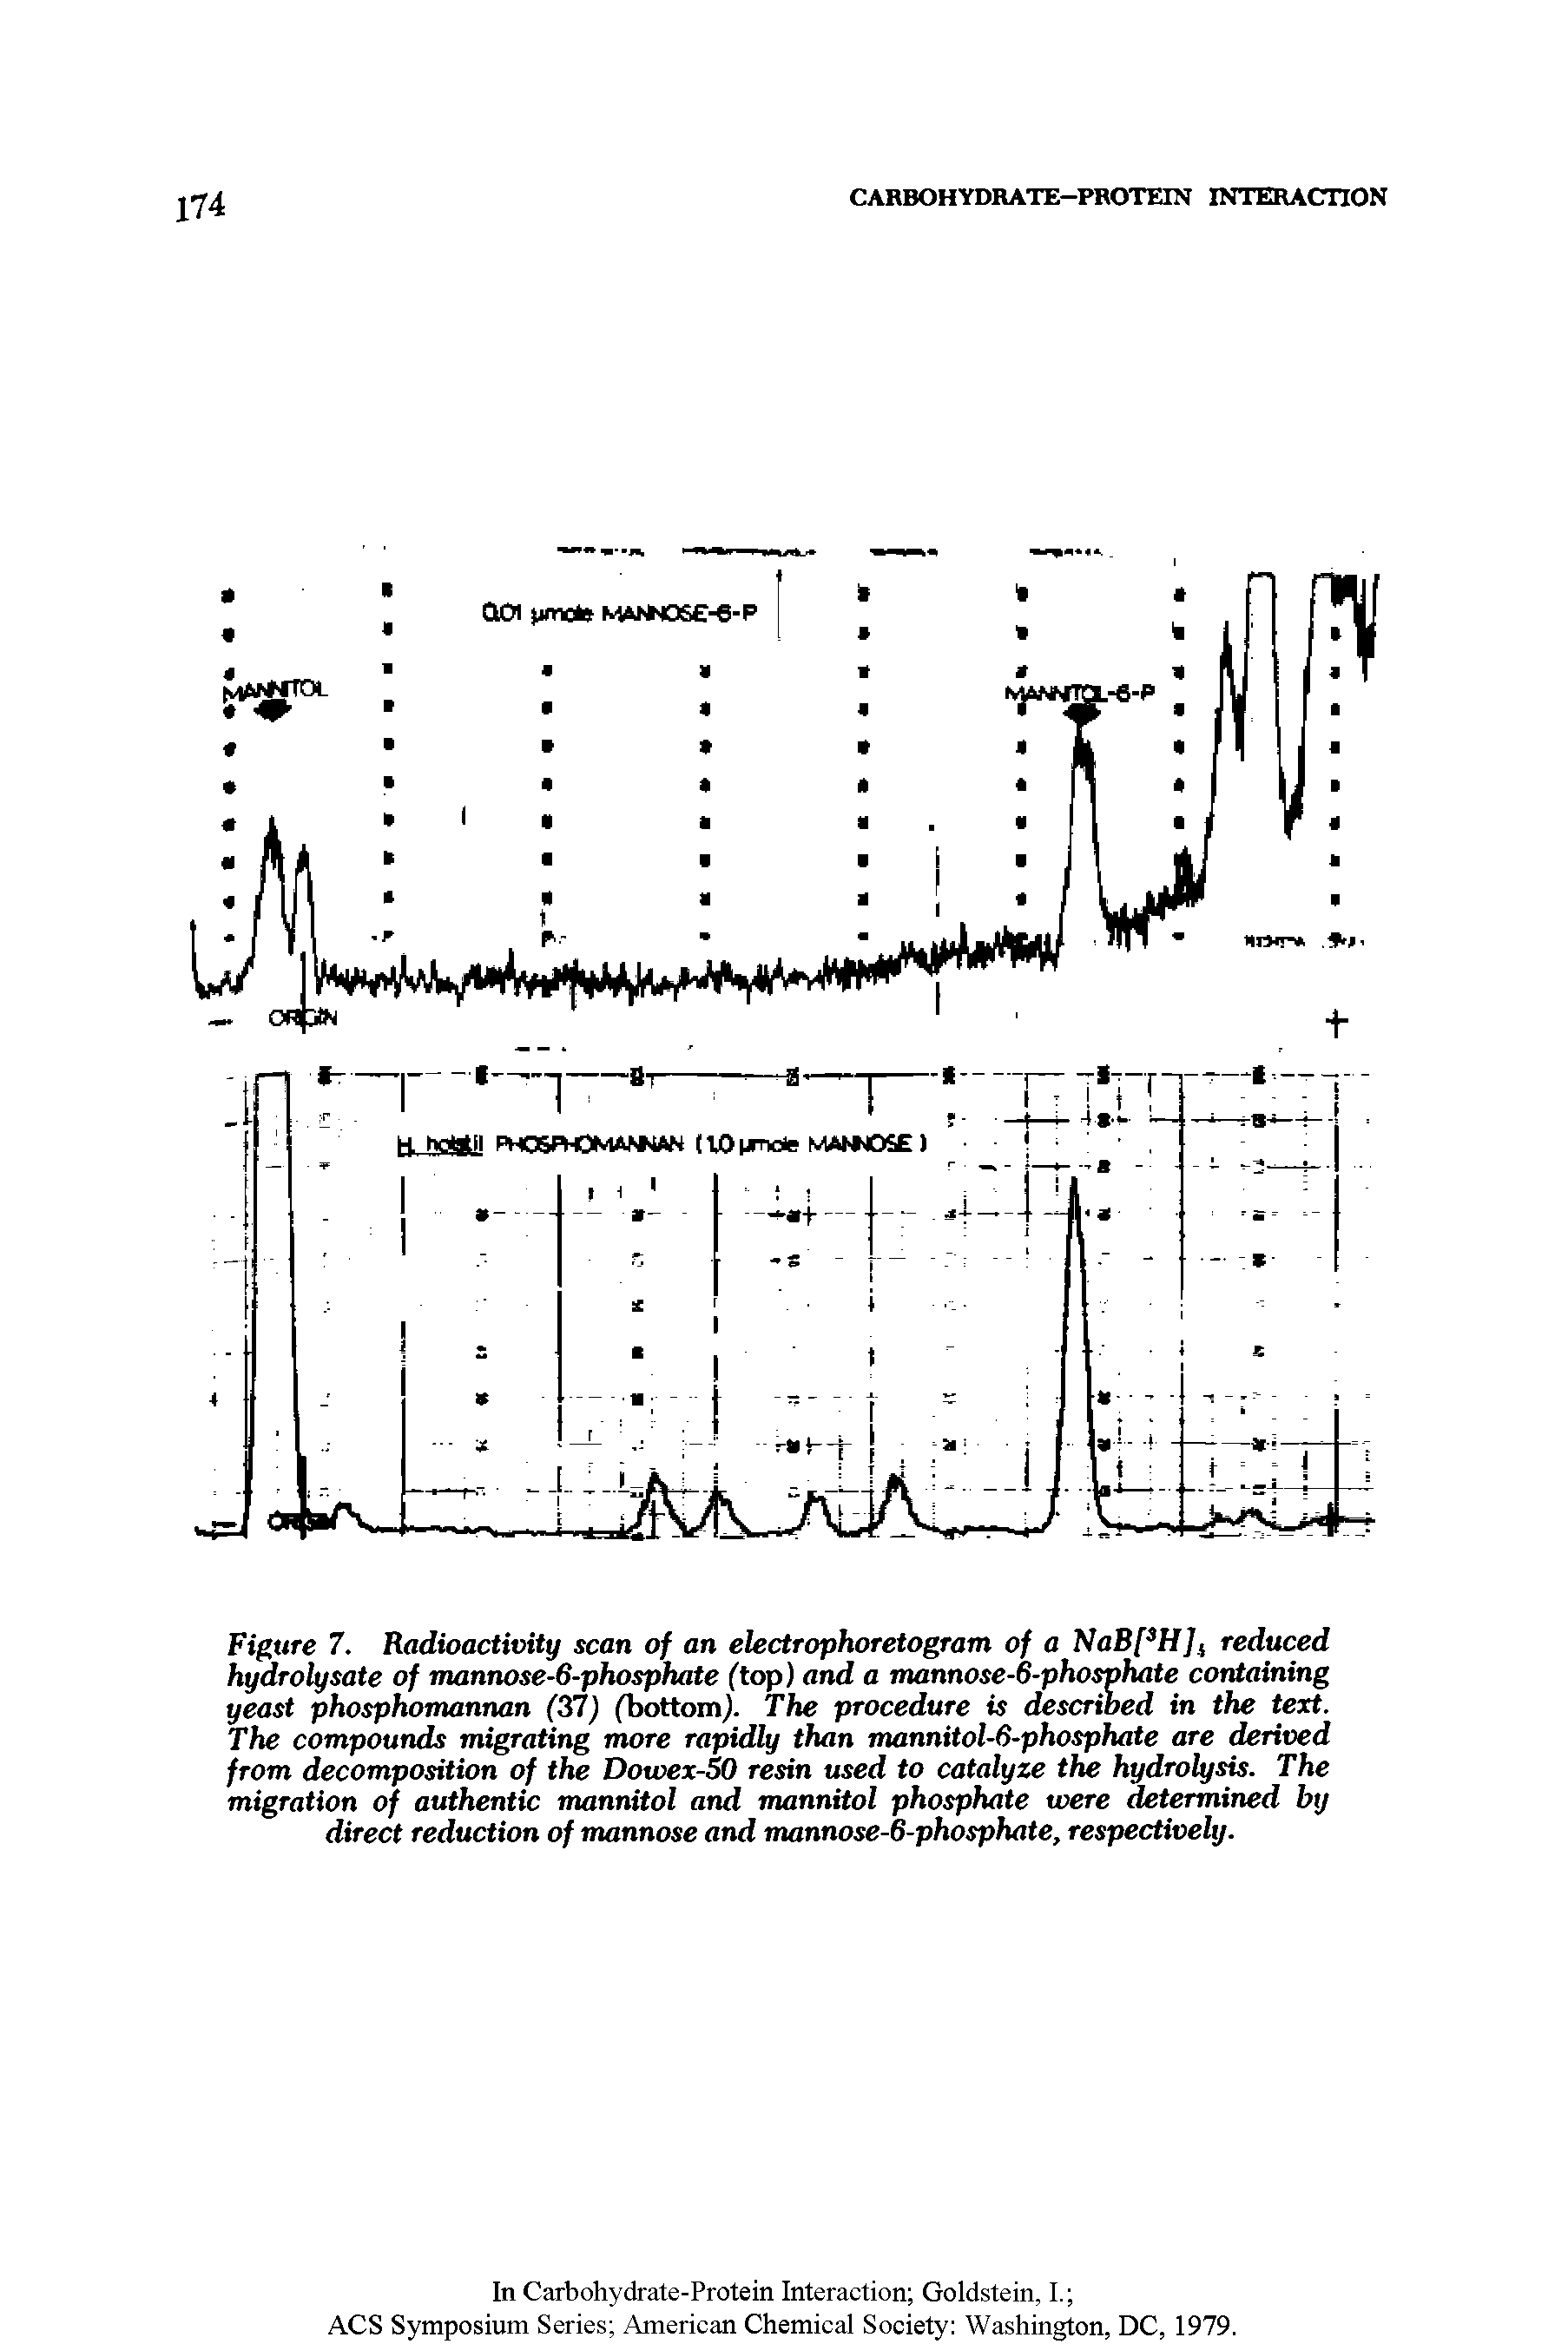 Figure 7. Radioactivity scan of an electrophoretogram of a NaB[3H]i reduced hydrolysate of mannose-6-phosphate (top) and a mannose-6-phosphate containing yeast phosphomannan (37) (bottom. The procedure is described in the text. The compounds migrating more rapidly than mannitol-6-phosphate are derived from decomposition of the Dowex-50 resin used to catalyze the hydrolysis. The migration of authentic mannitol and mannitol phosphate were determined by direct reduction of mannose and mannose-6-phosphate, respectively.